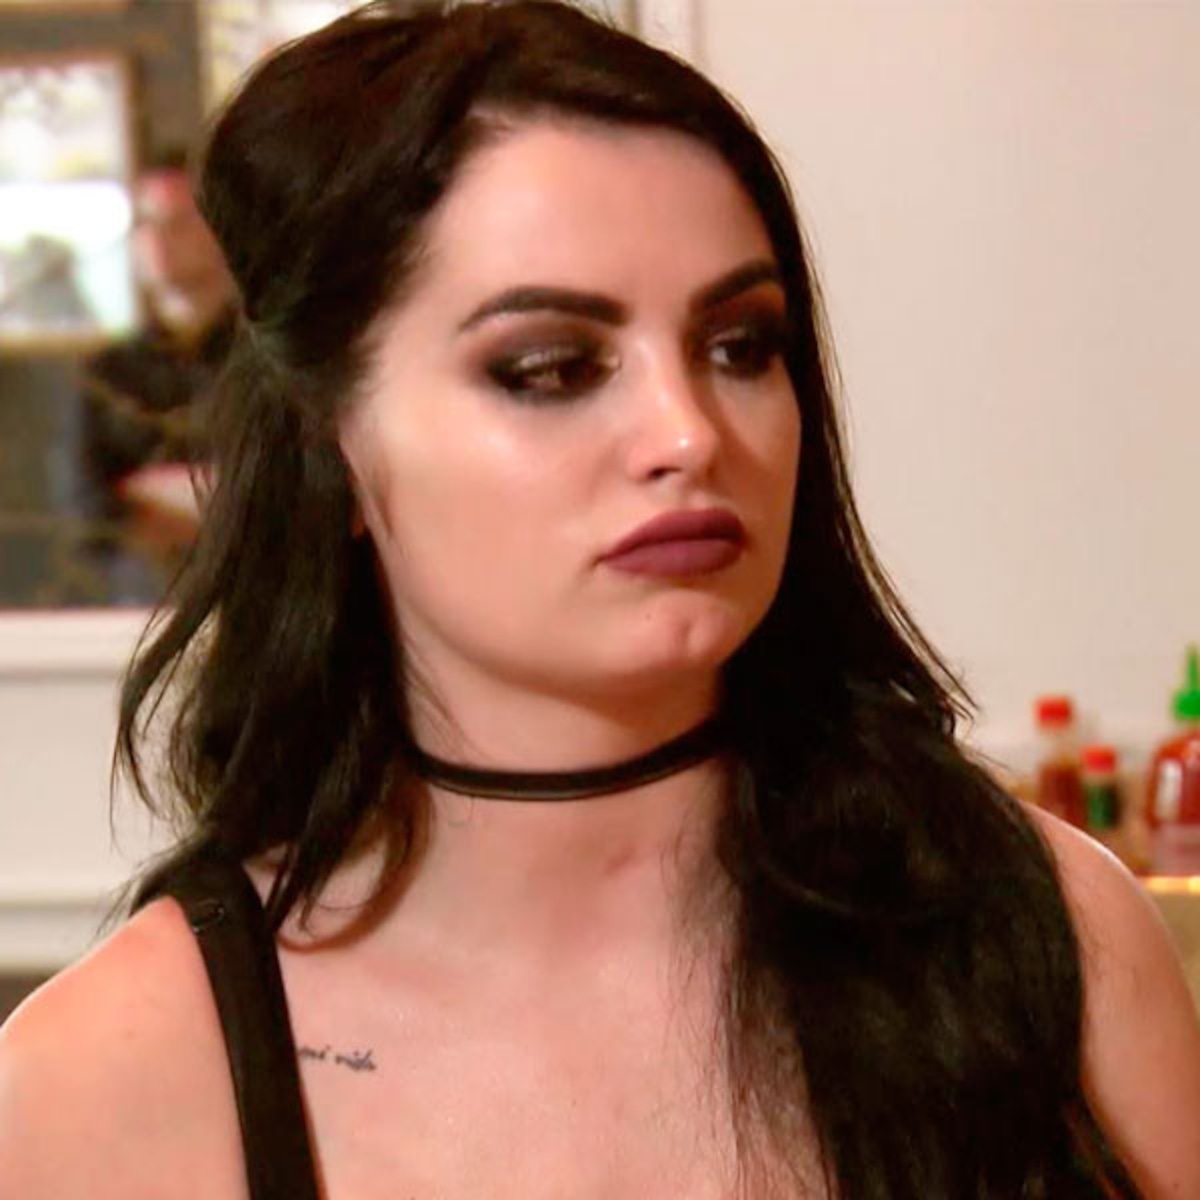 Paige porn diva This is